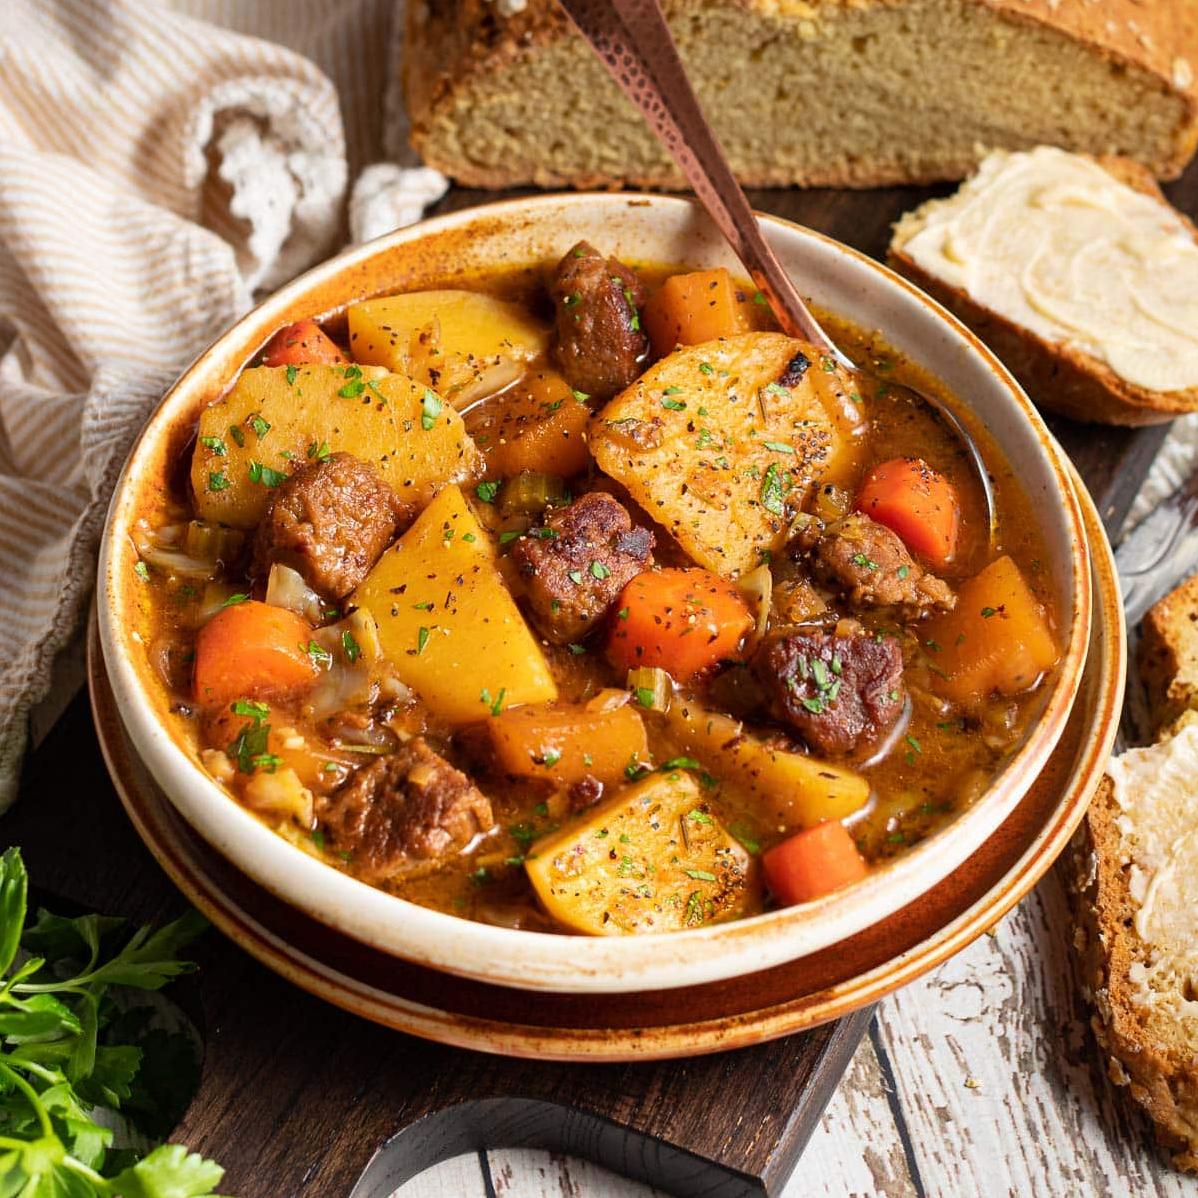  The vibrant colors in this stew will have your taste buds dancing with excitement.